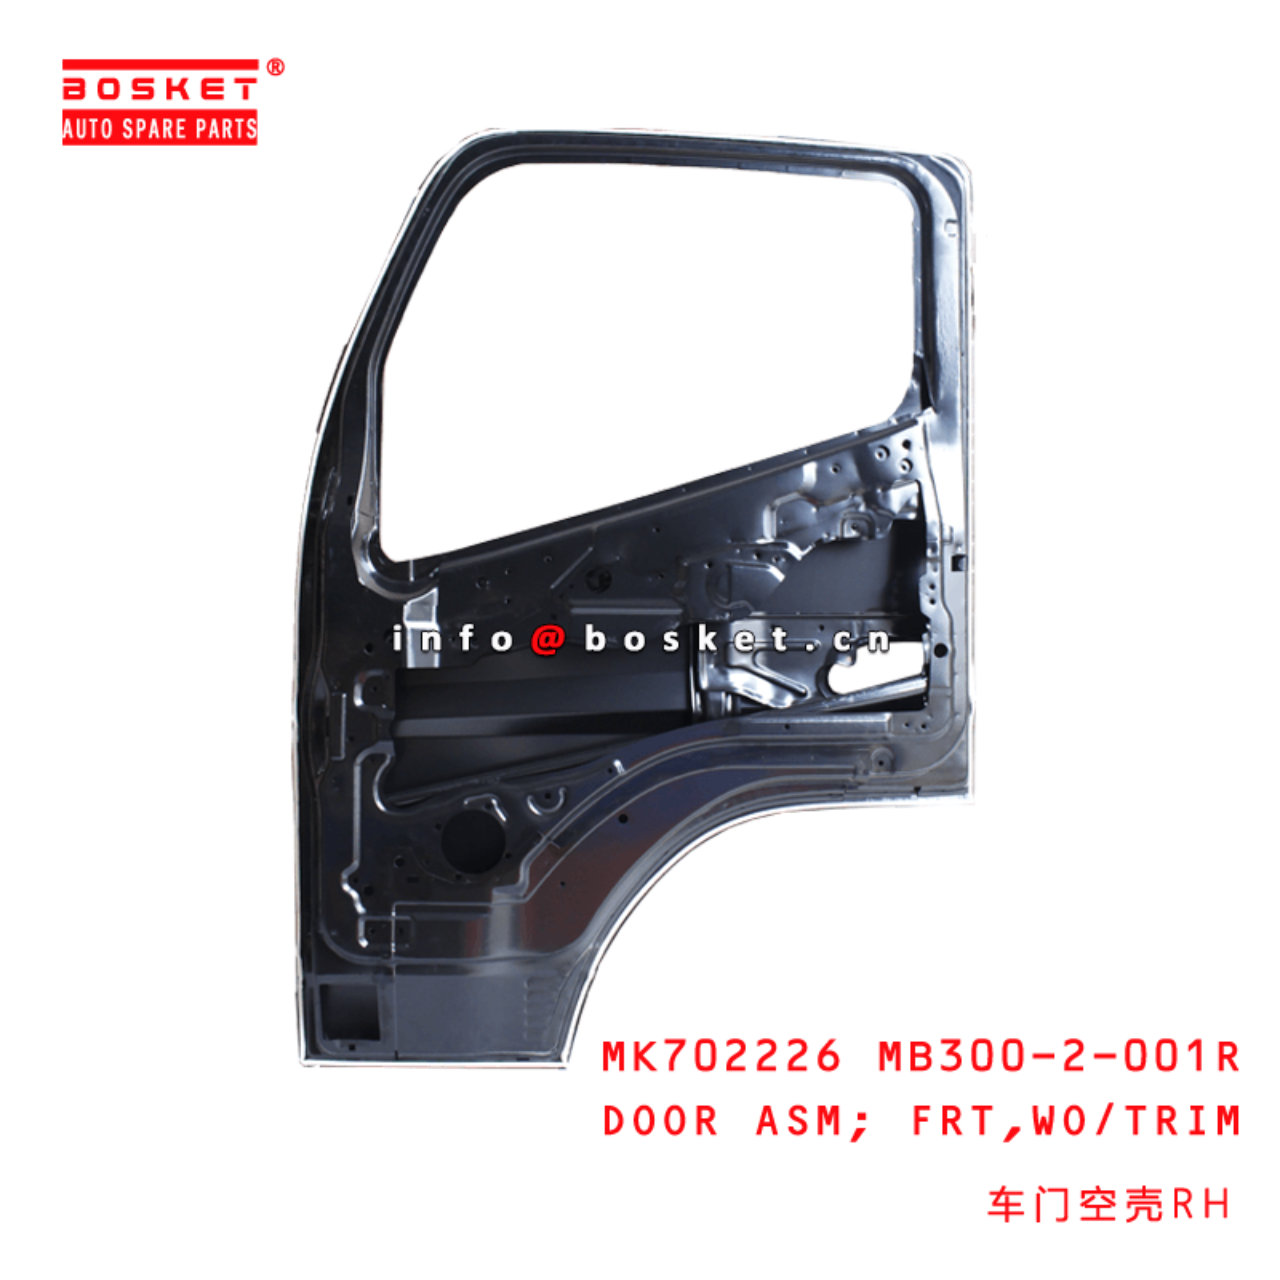  MK702226 MB300-2-001R Without Trim Front Door Assembly Suitable For MITSUBISHI FUSO CANTER RUS